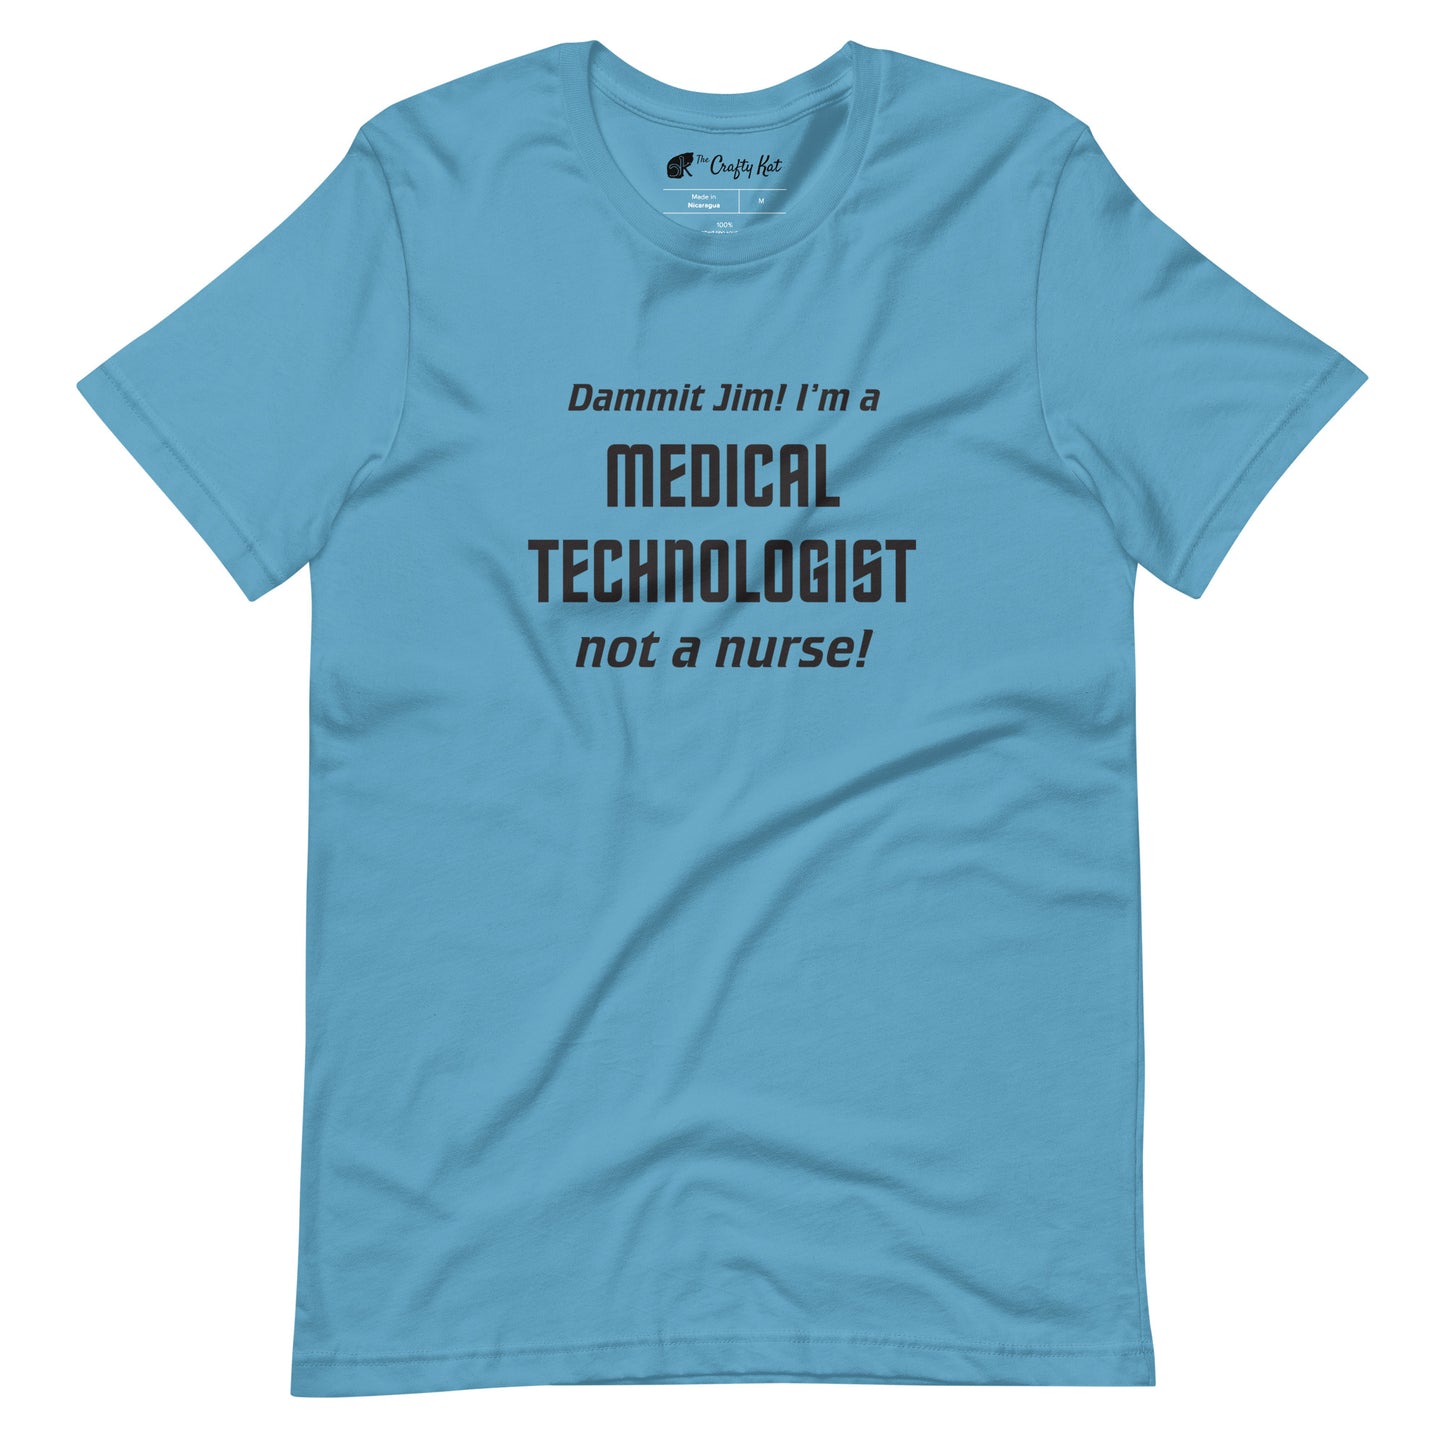 Ocean Blue t-shirt with text graphic in Star Trek font: "Dammit Jim! I'm a MEDICAL TECHNOLOGIST not a nurse!"